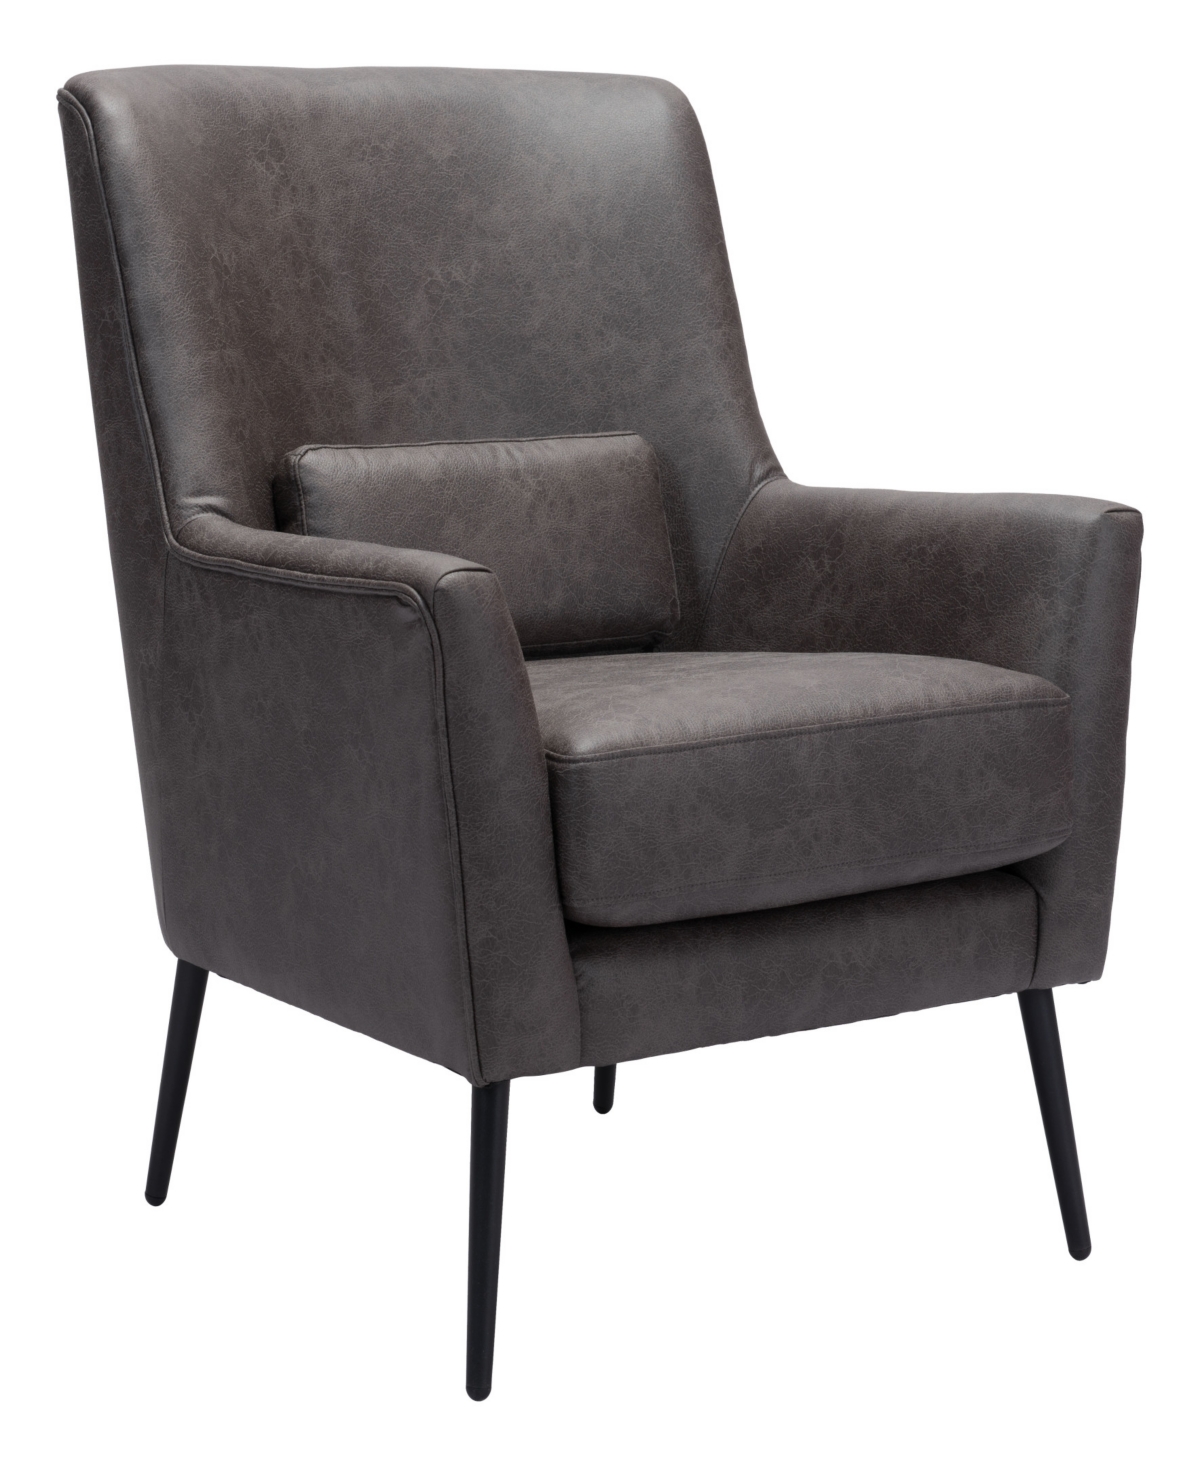 ZUO 36" STEEL, POLYESTER ONTARIO BOHO CHIC ACCENT CHAIR